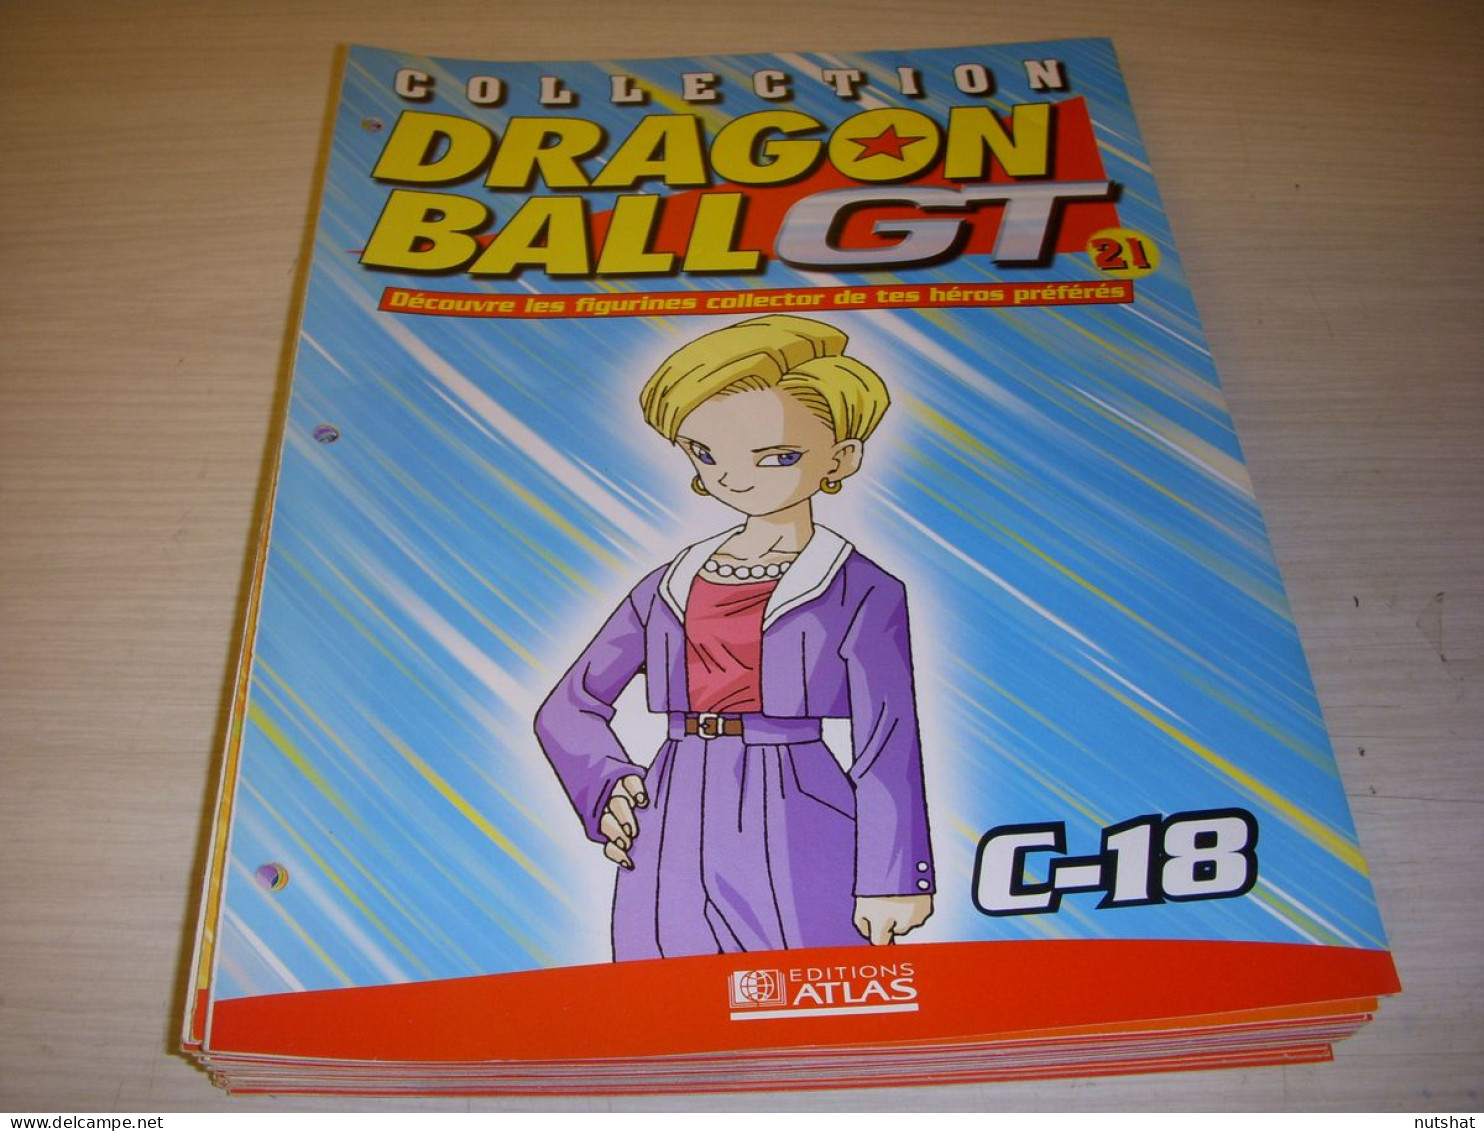 COLLECTION DRAGON BALL 21 C-18 CHAOZ Freres PARABARA FREEZER Dessine C-18 - Other Products